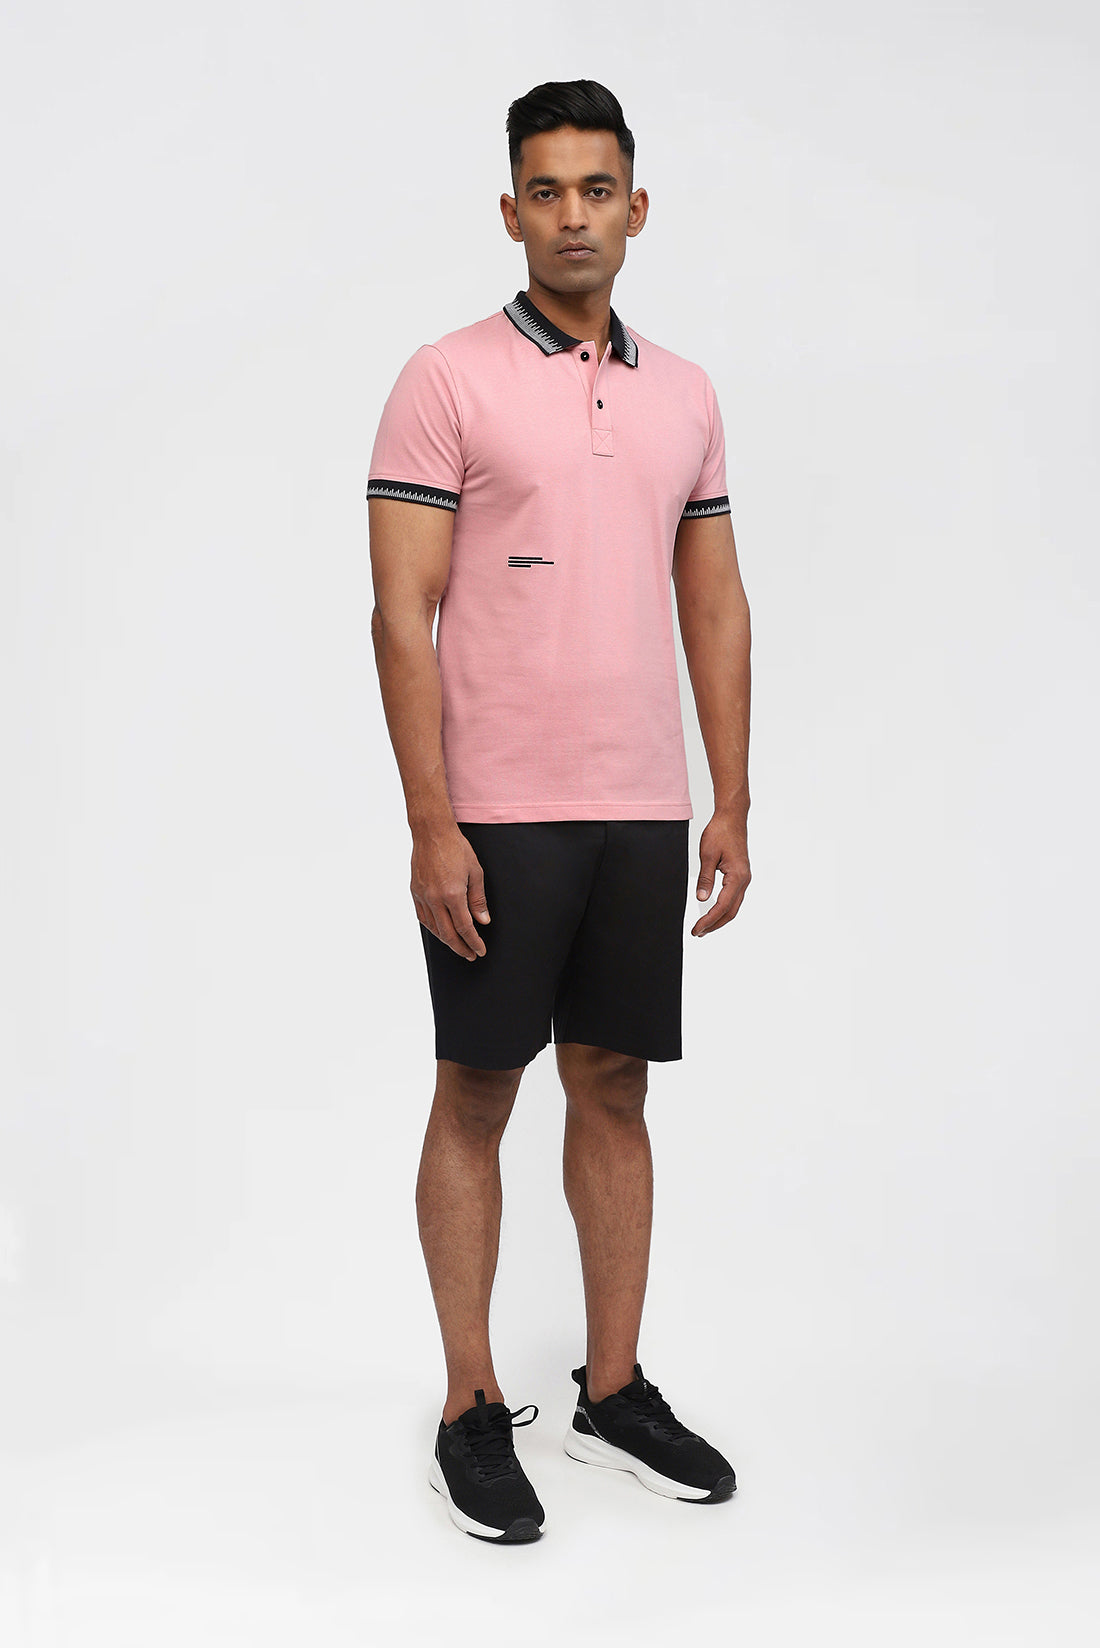 Casuals Men's Polo T-Shirt with Genes Monogram